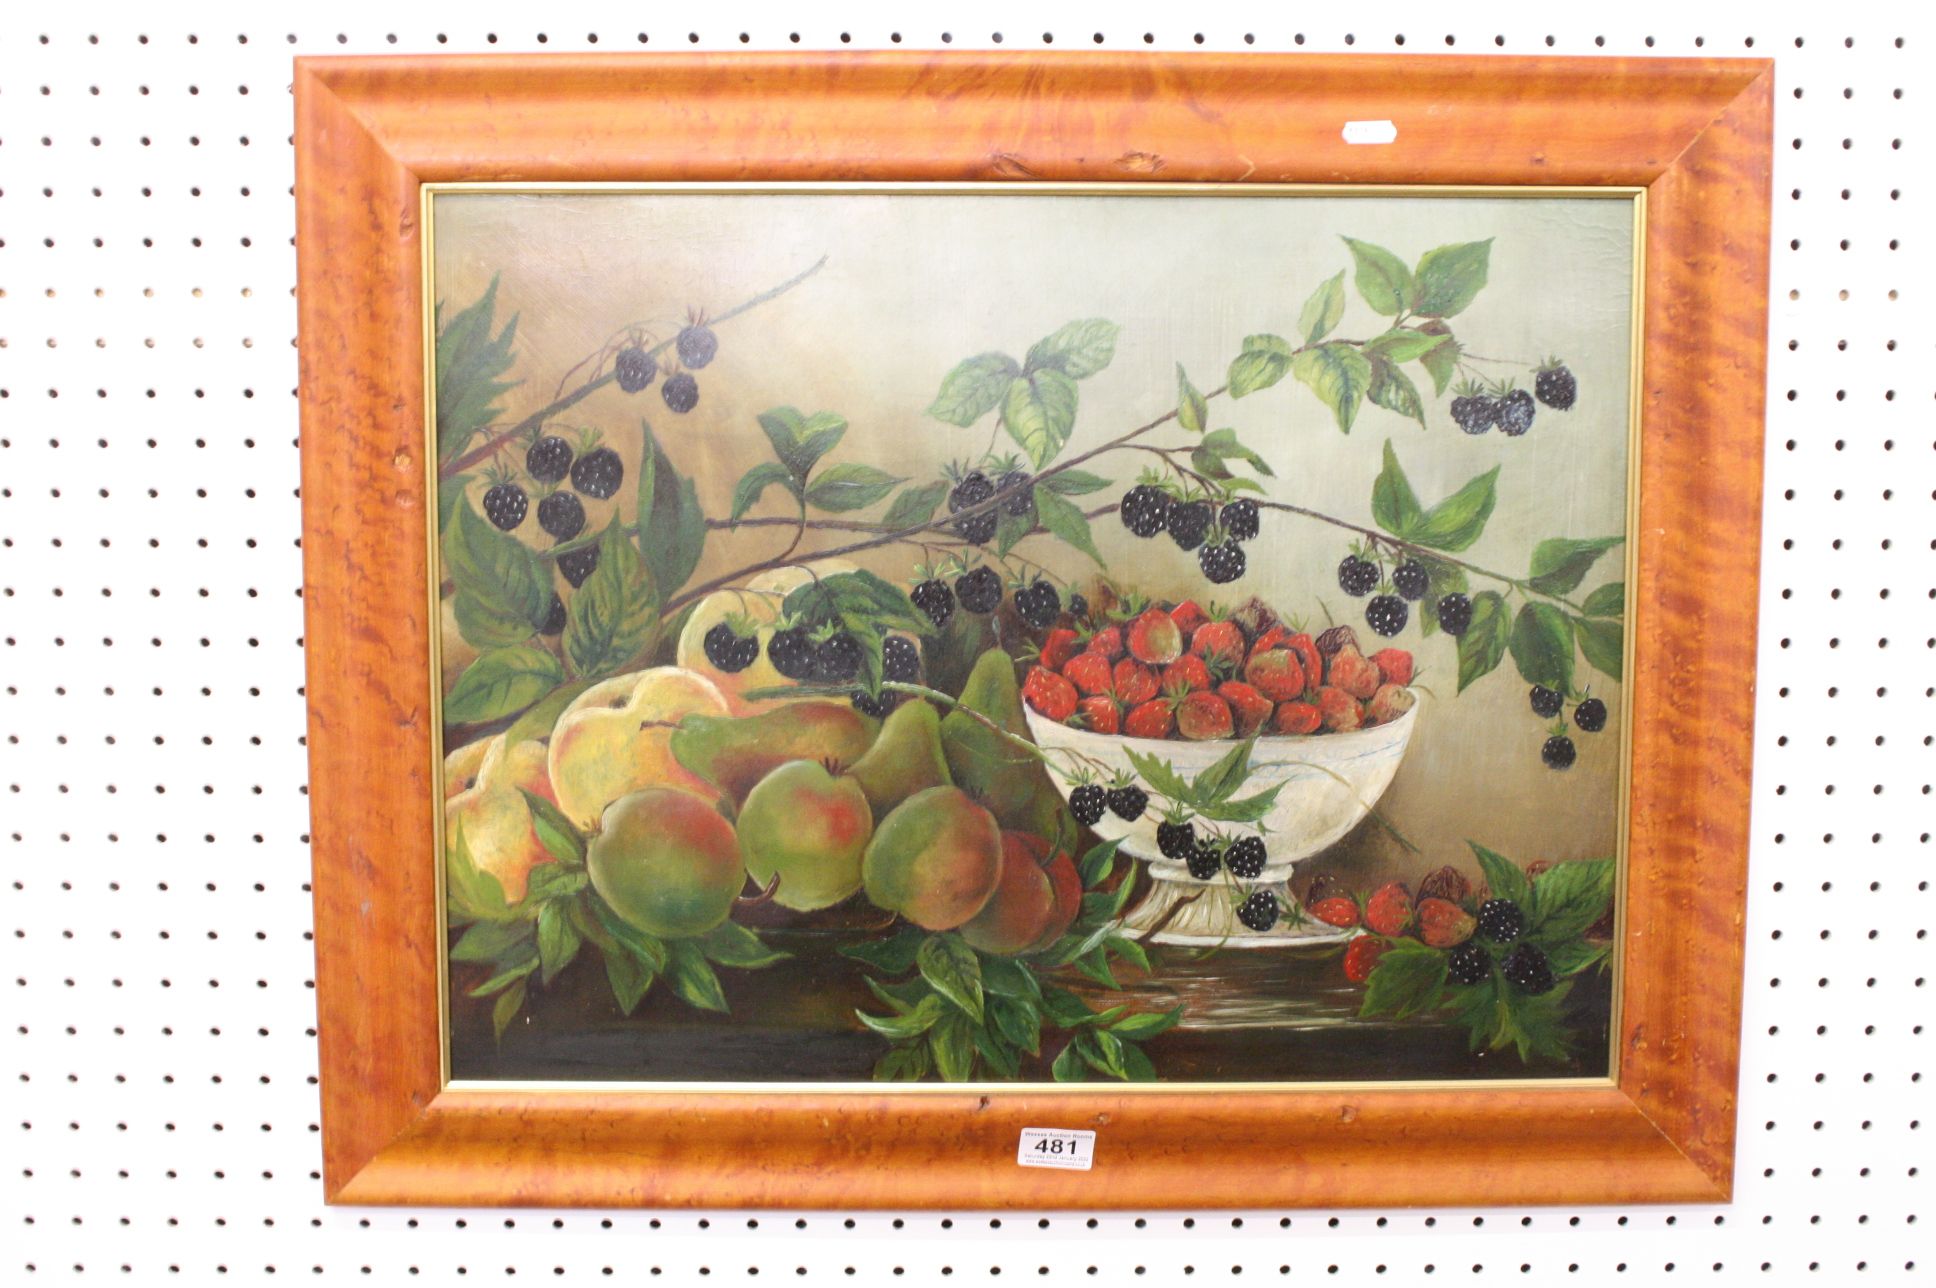 Oil Painting on Board of Fruits including Blackberries, Strawberries, Apples and Pears, 59cms x